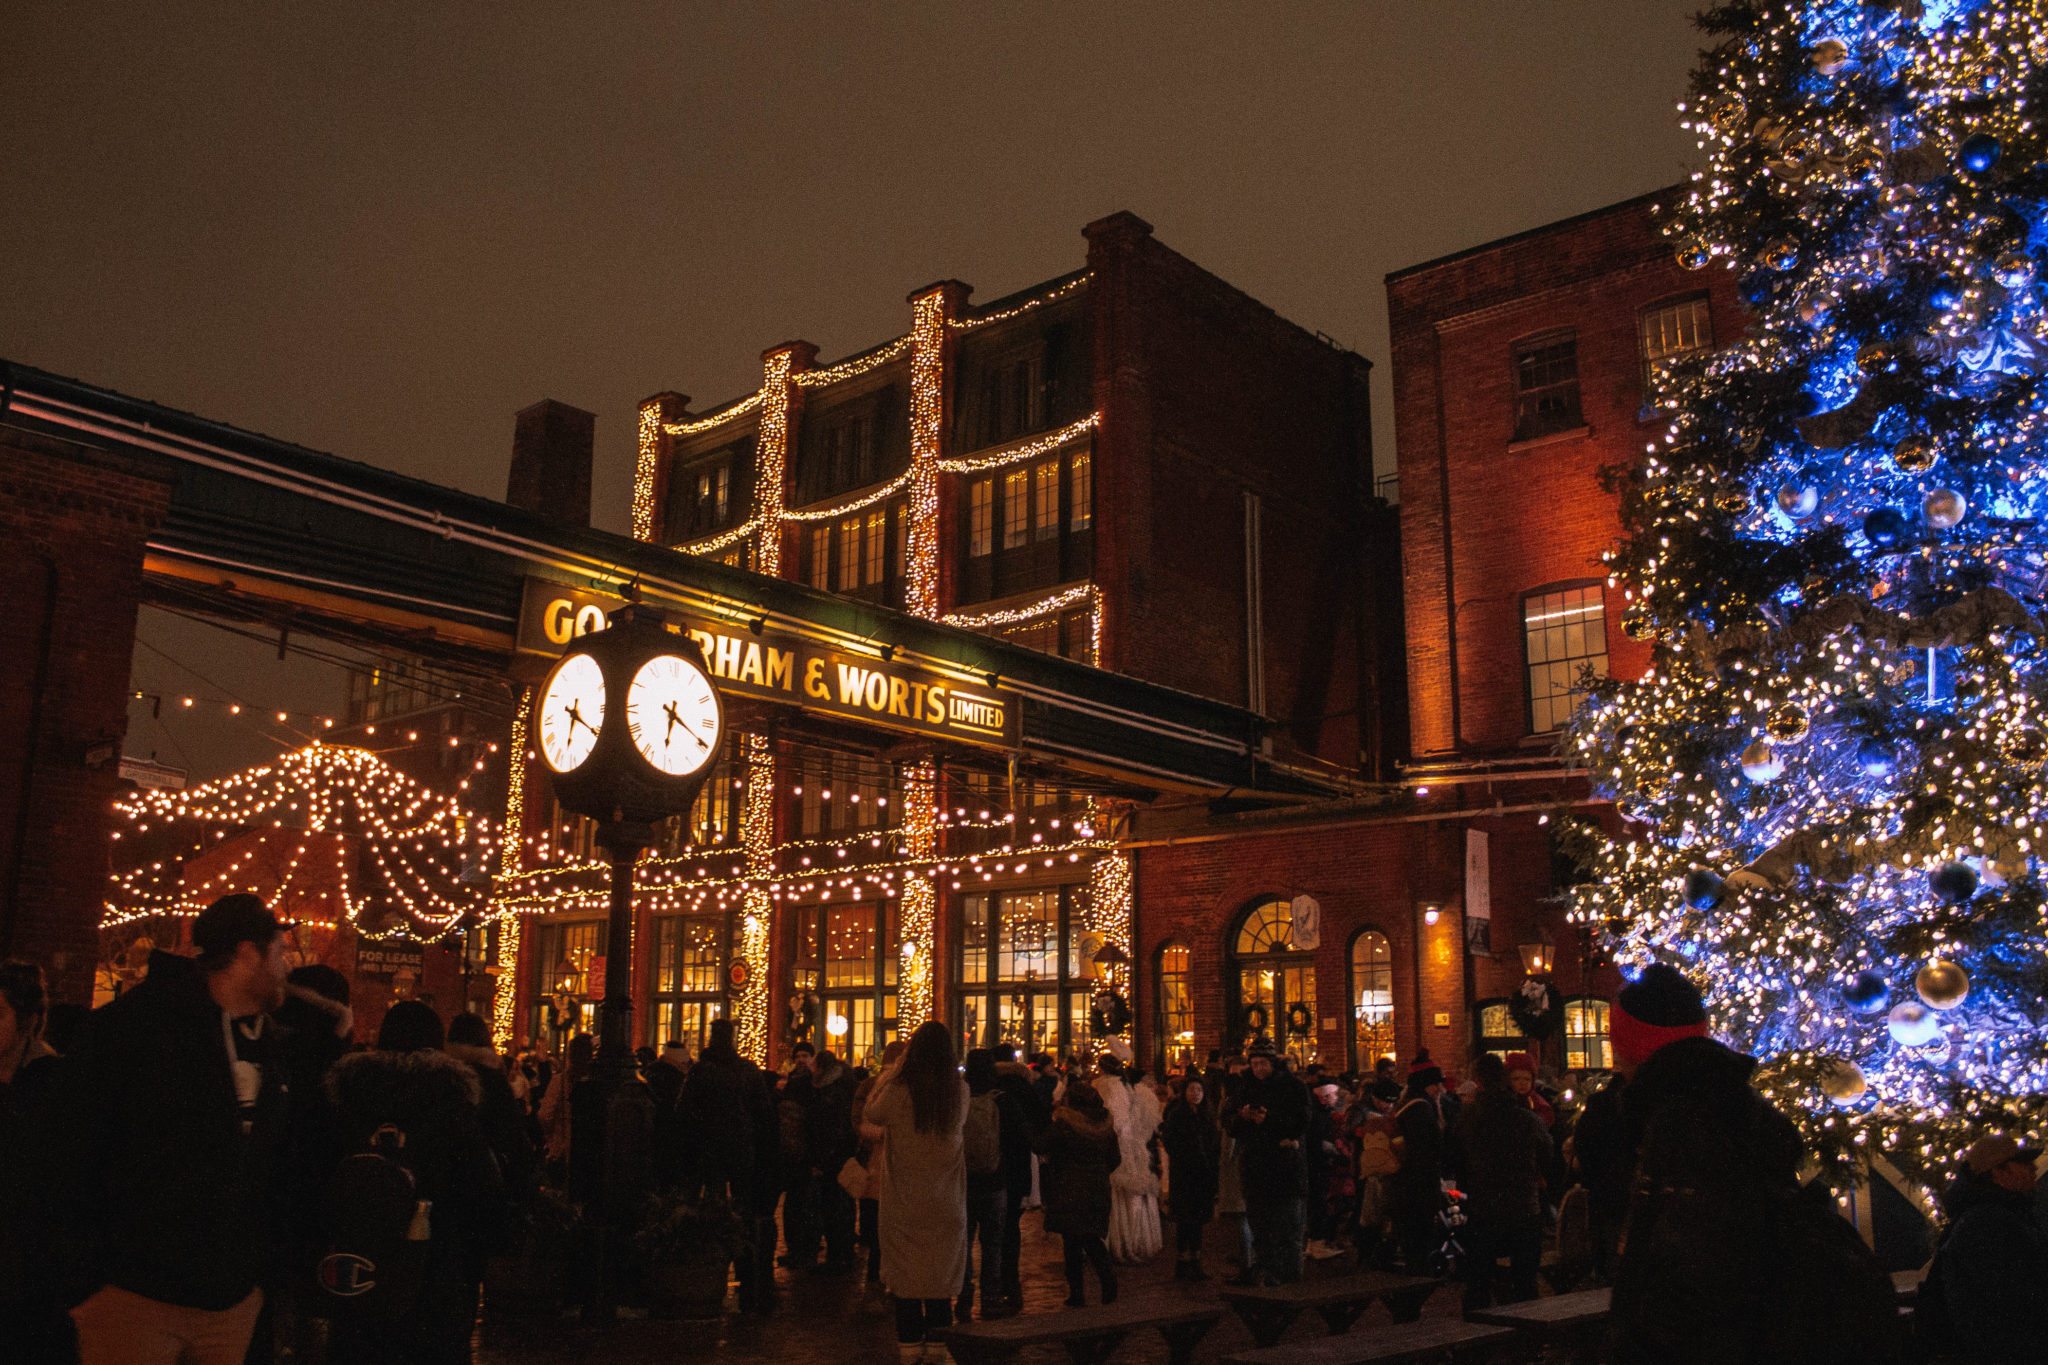 Toronto's Christmas Market in the Distillery District